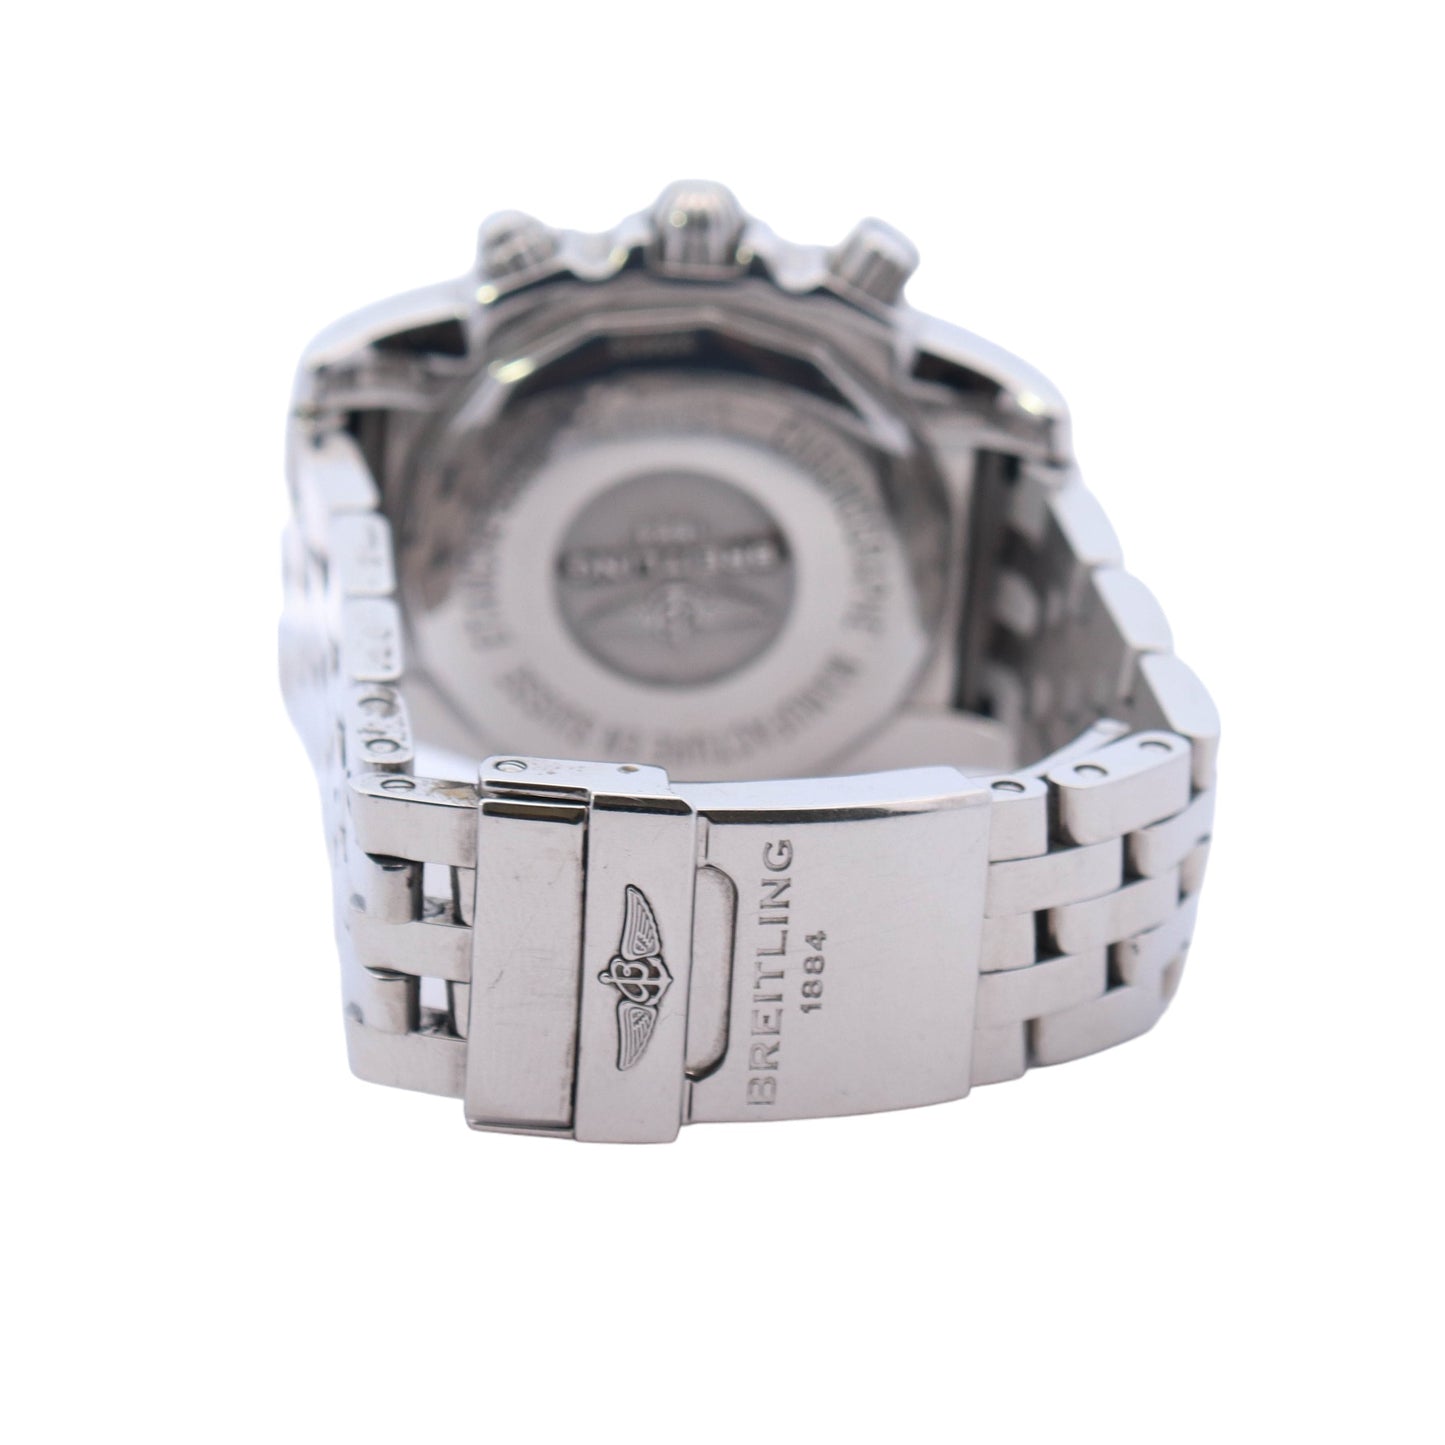 Breitling Chronomat Stainless Steel 41mm Grey Chronograph Dial Watch Reference #: AB014012/F554